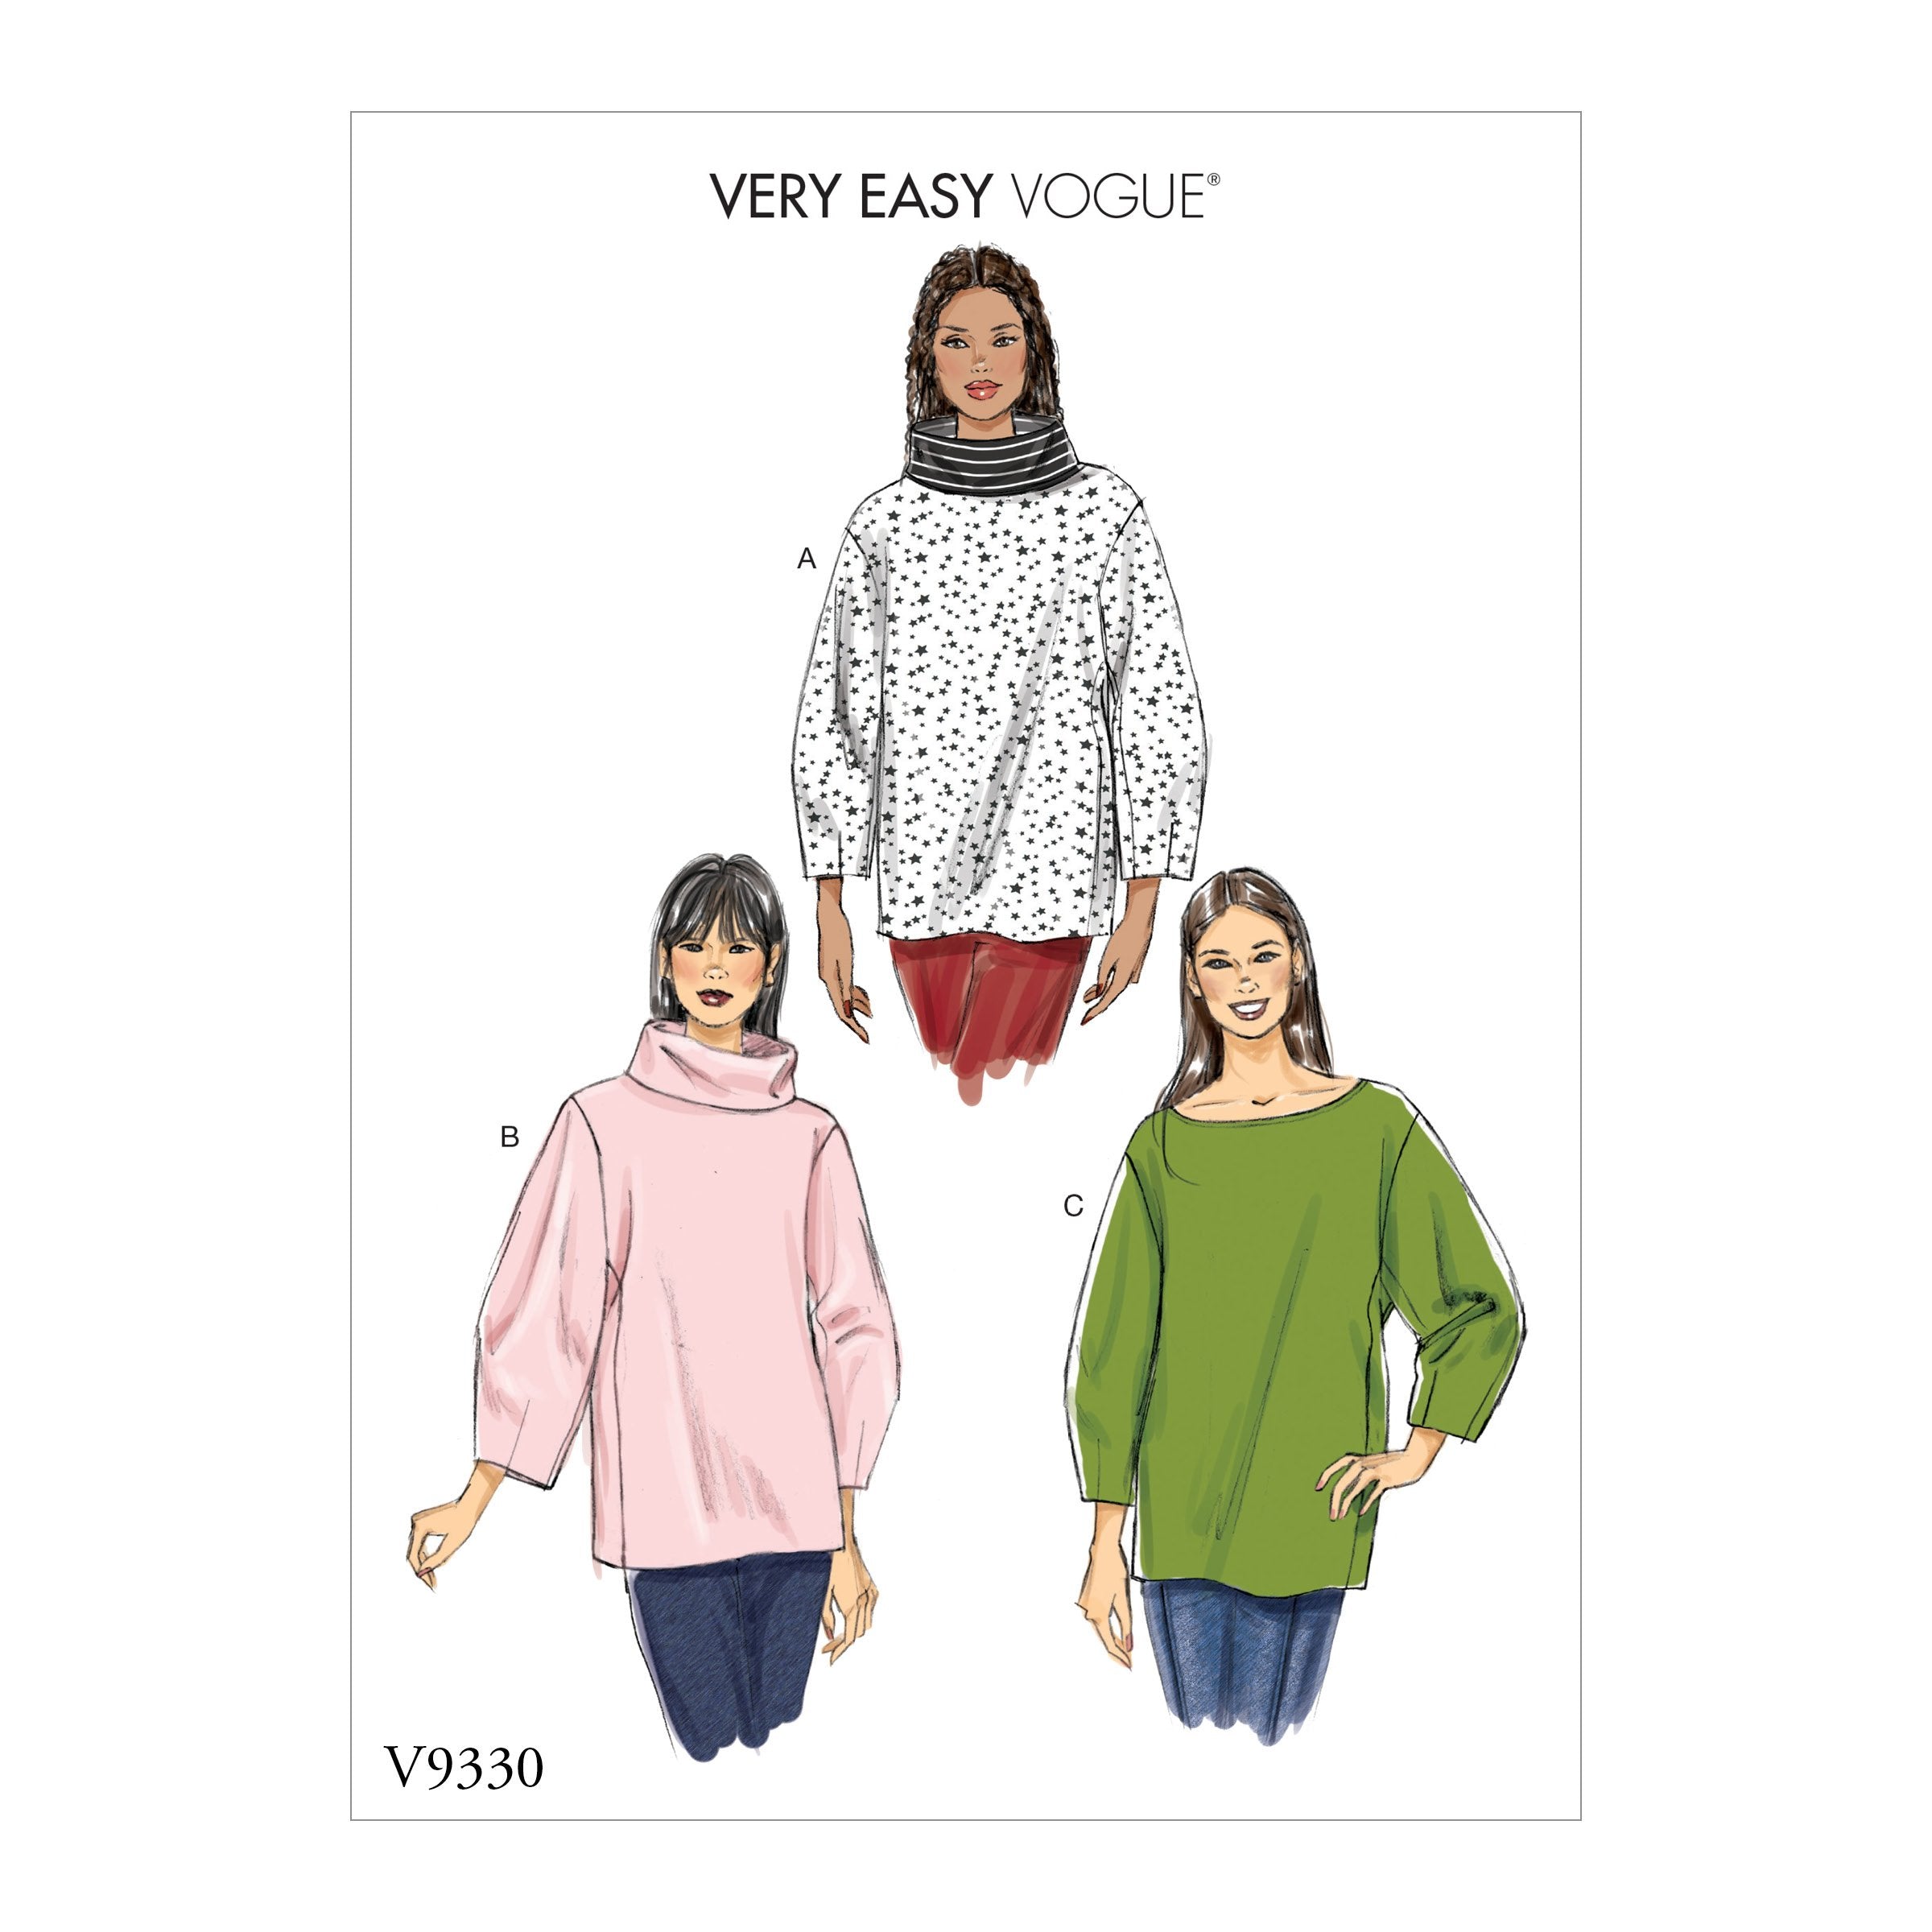 Vogue Pattern 9330 Misses' Top | Very Easy Vogue from Jaycotts Sewing Supplies